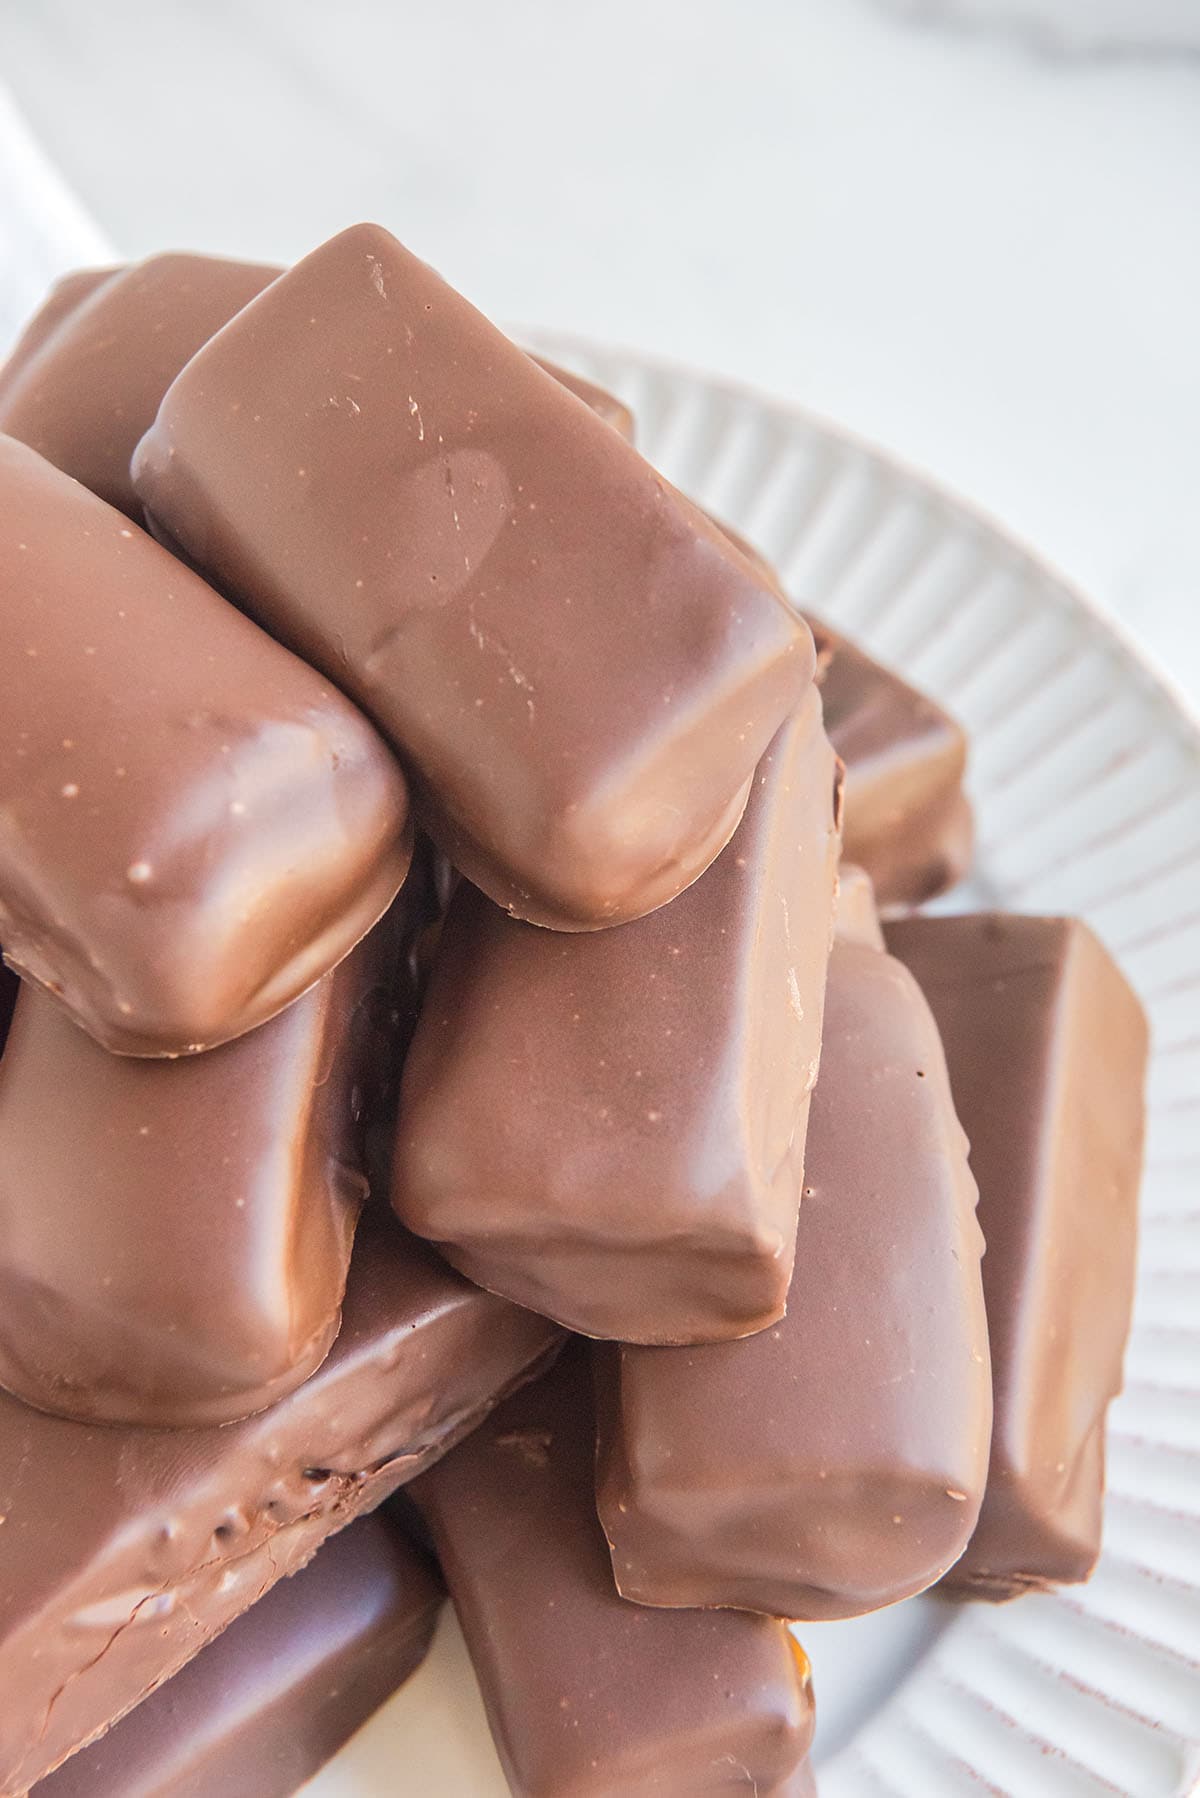 Homemade Milky Way Bars on a plate